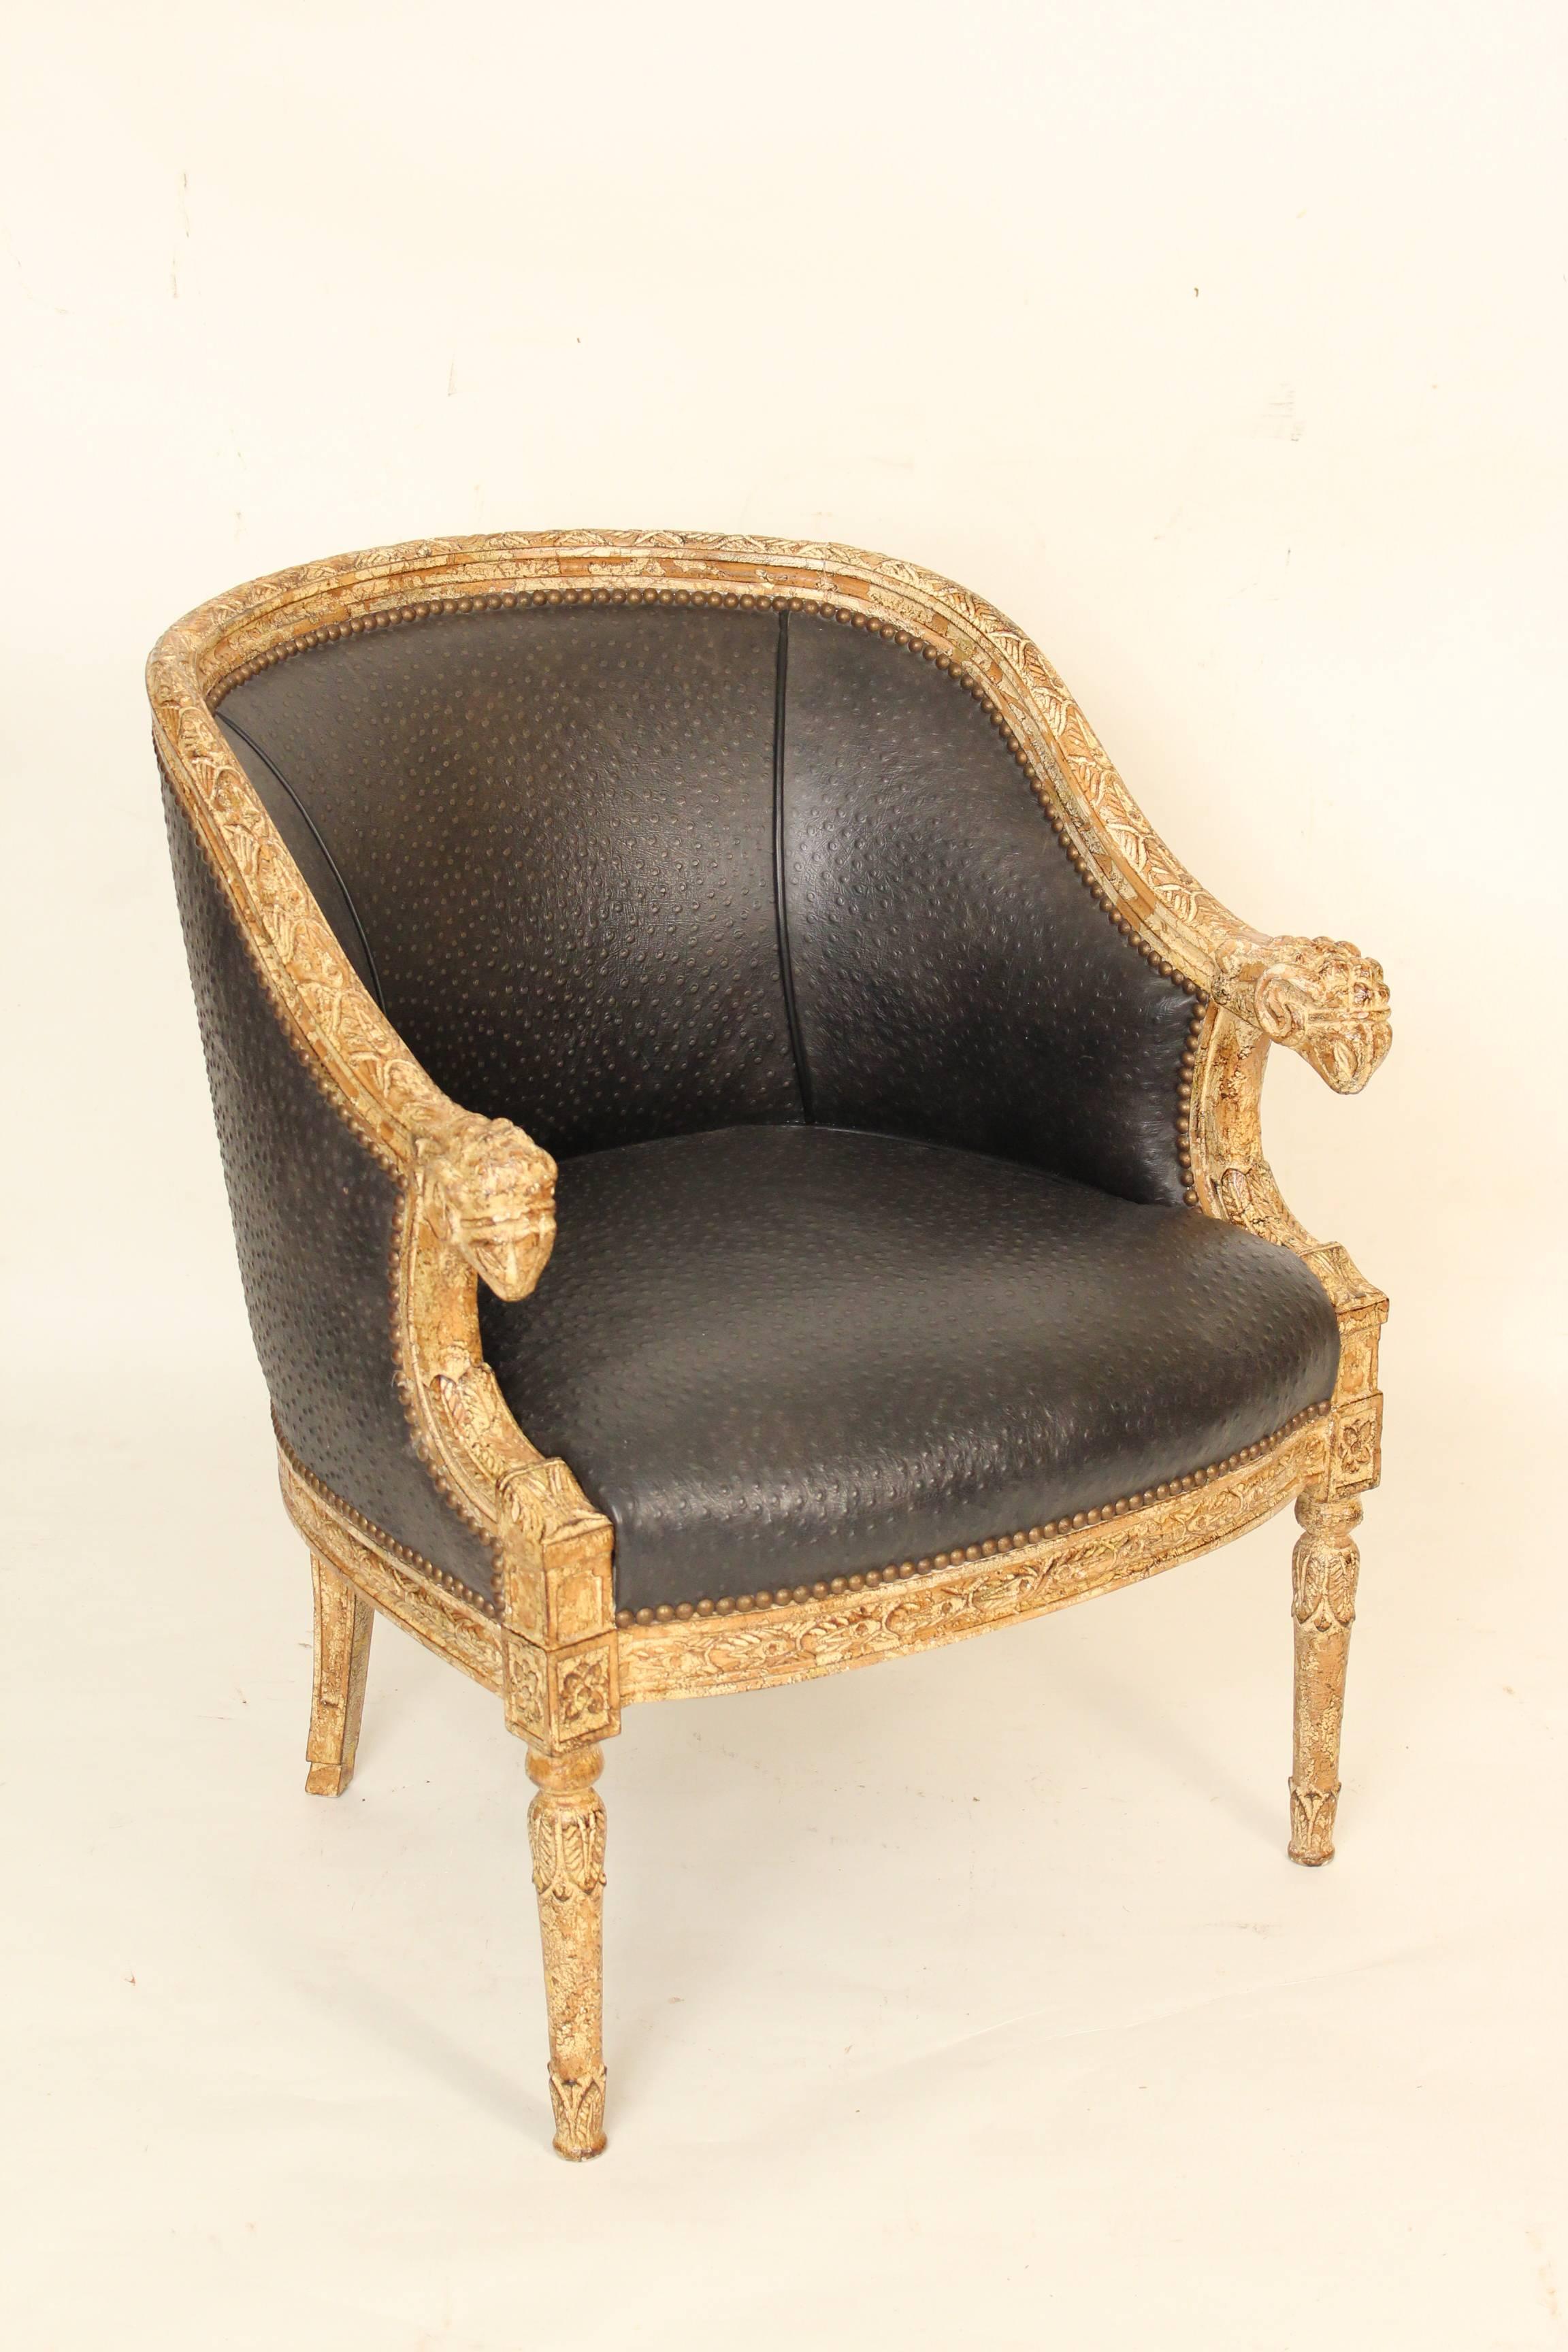 Pair of painted neoclassical style bergeres with ram's head carved arms and faux ostrich leather upholstery, circa 1990s.